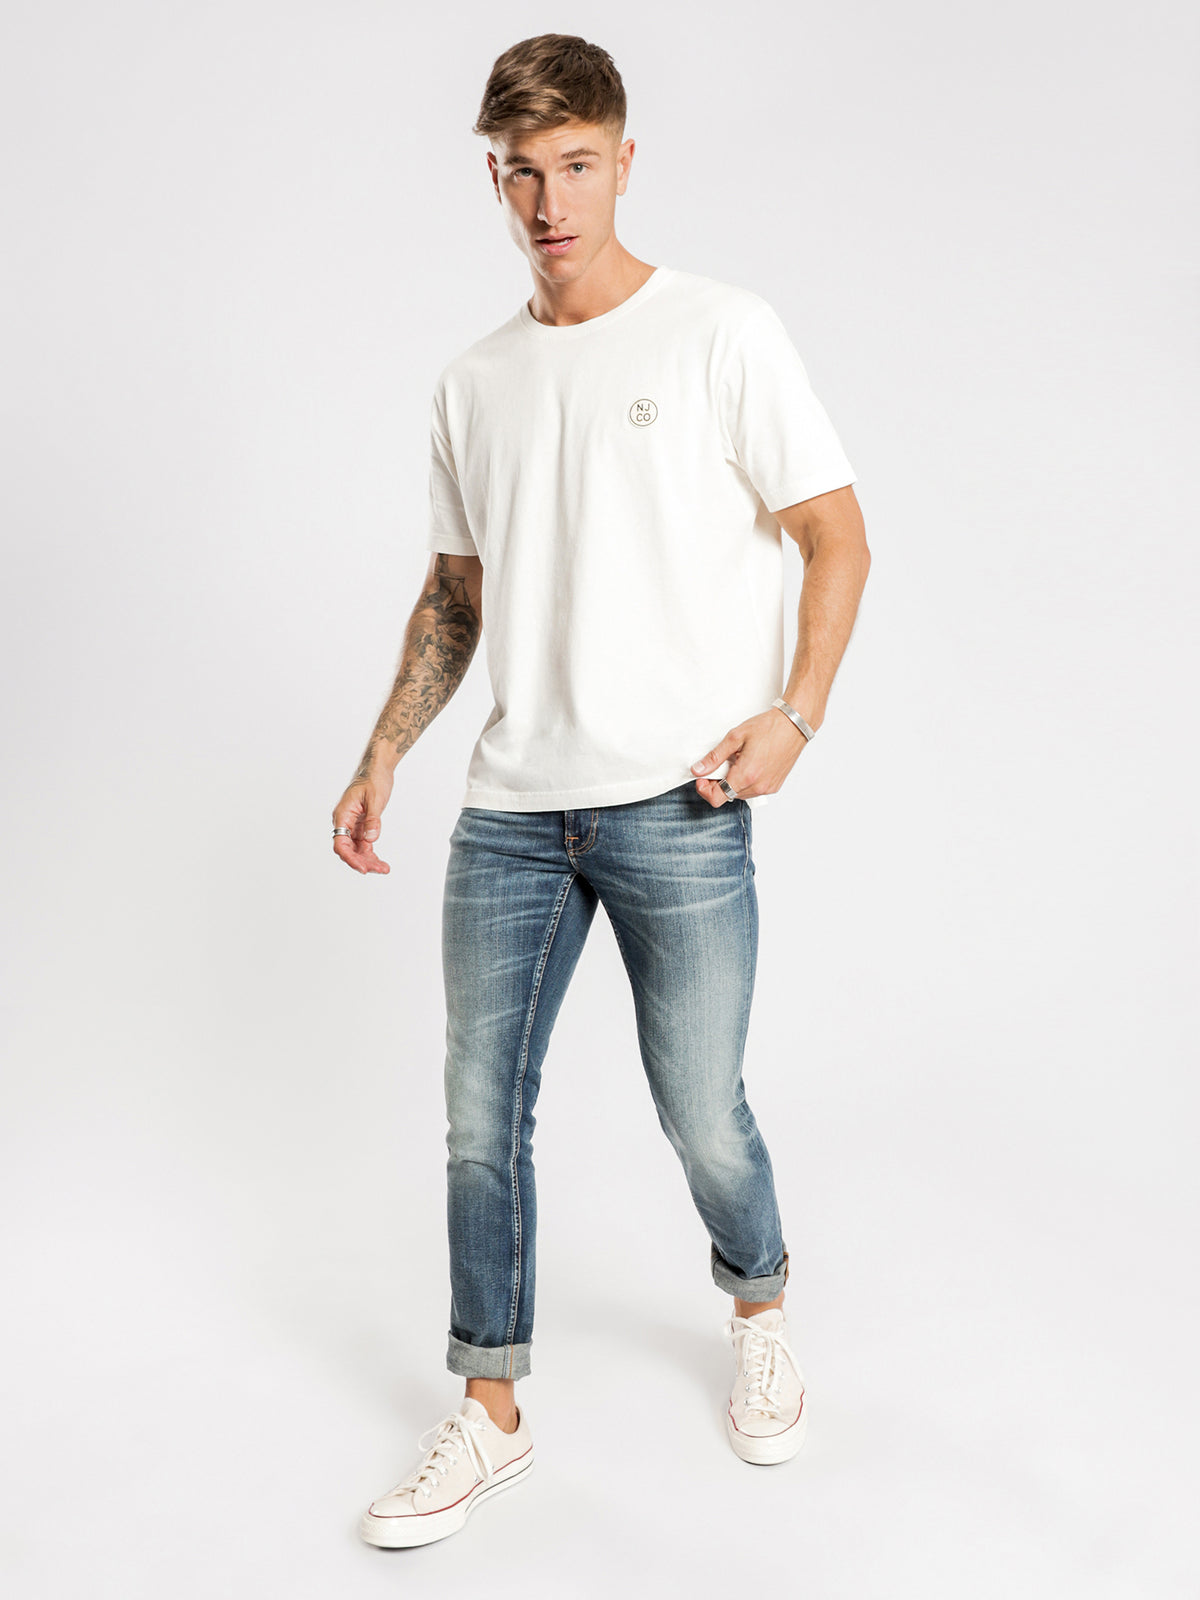 Uno Njco Circle T-Shirt in Dusty White